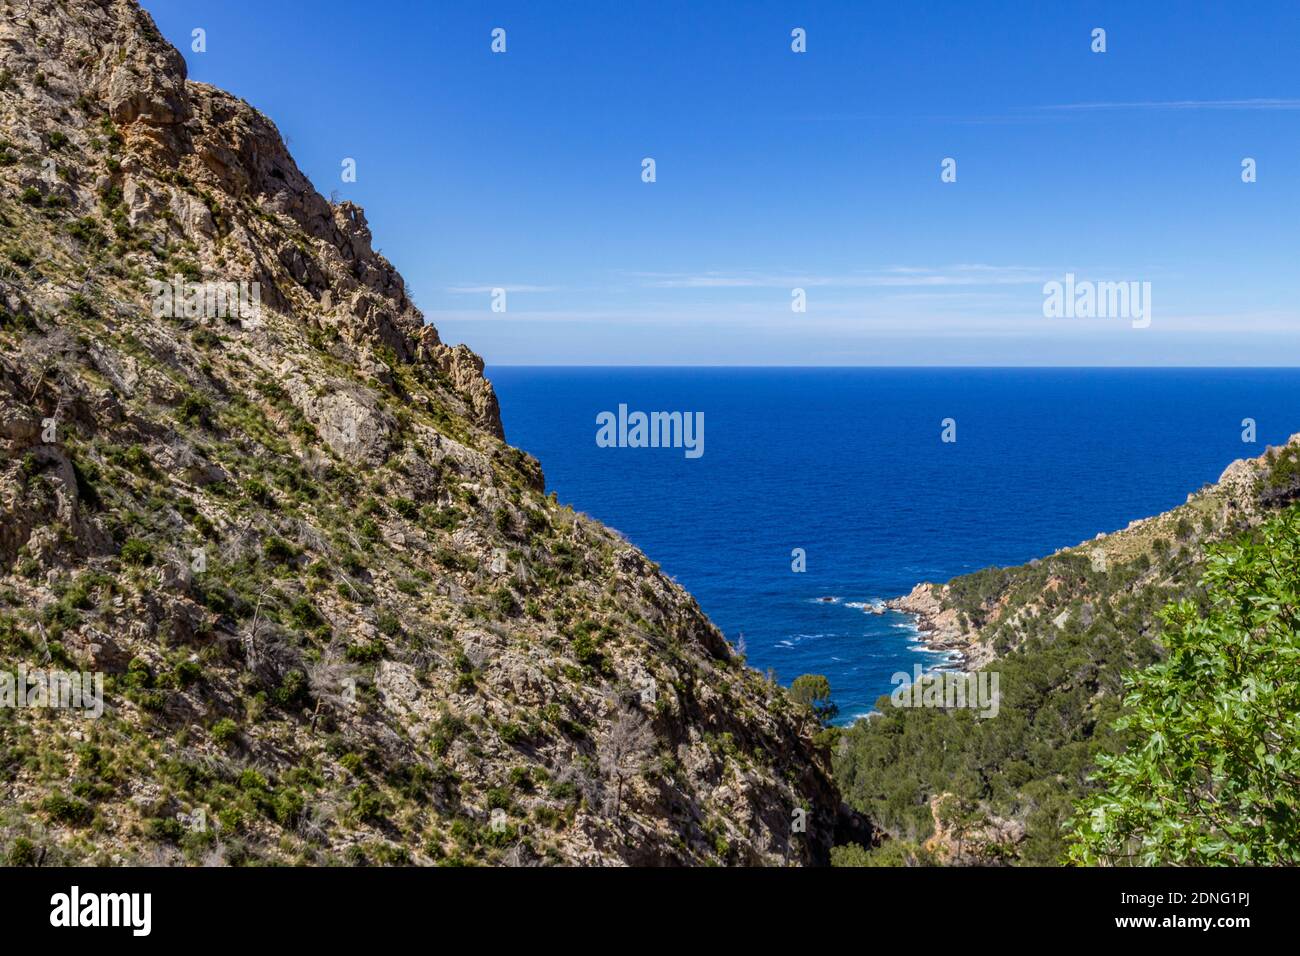 Scenic View From Viewpoint Mirador Ricardo Roco On A Bay At The North Coast  Of Mallorca Stock Photo - Alamy